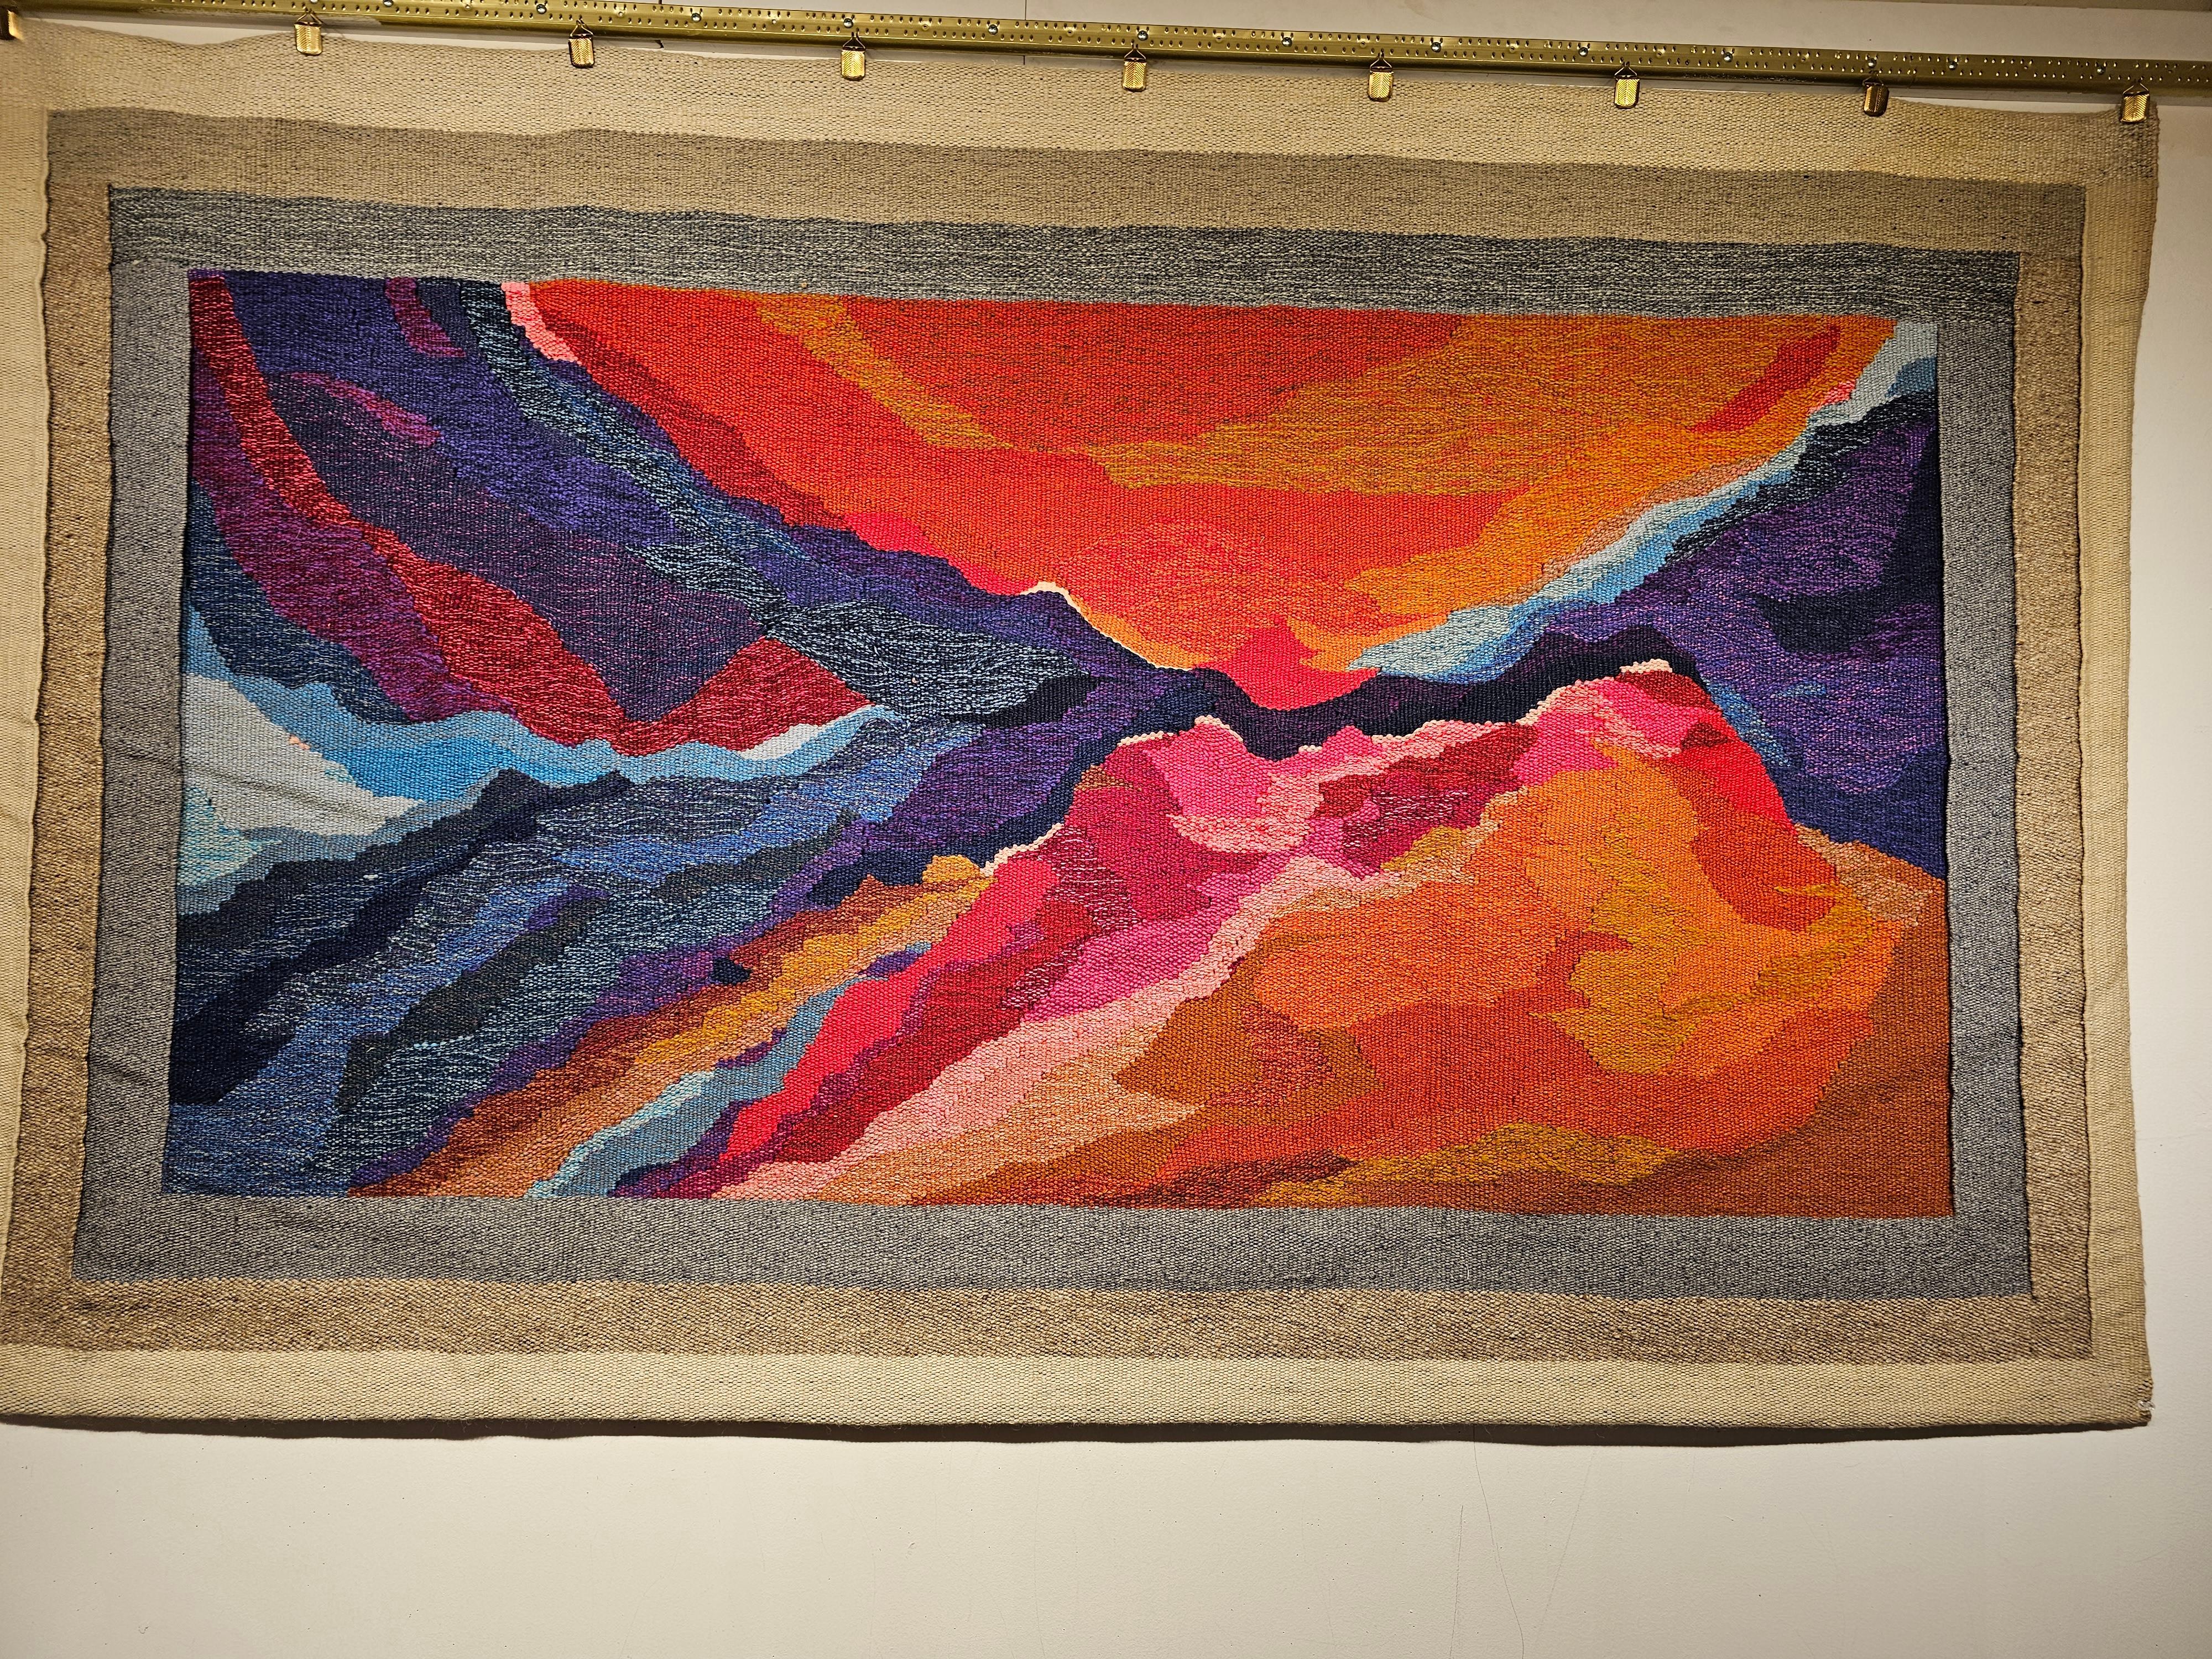 Beautiful and colorful mid century modern hand woven tapestry with an abstract depiction capturing the light and colors in the American Southwest landscape of mountains and canyons at the sunrise or sunset. The tapestry is very much in the style of